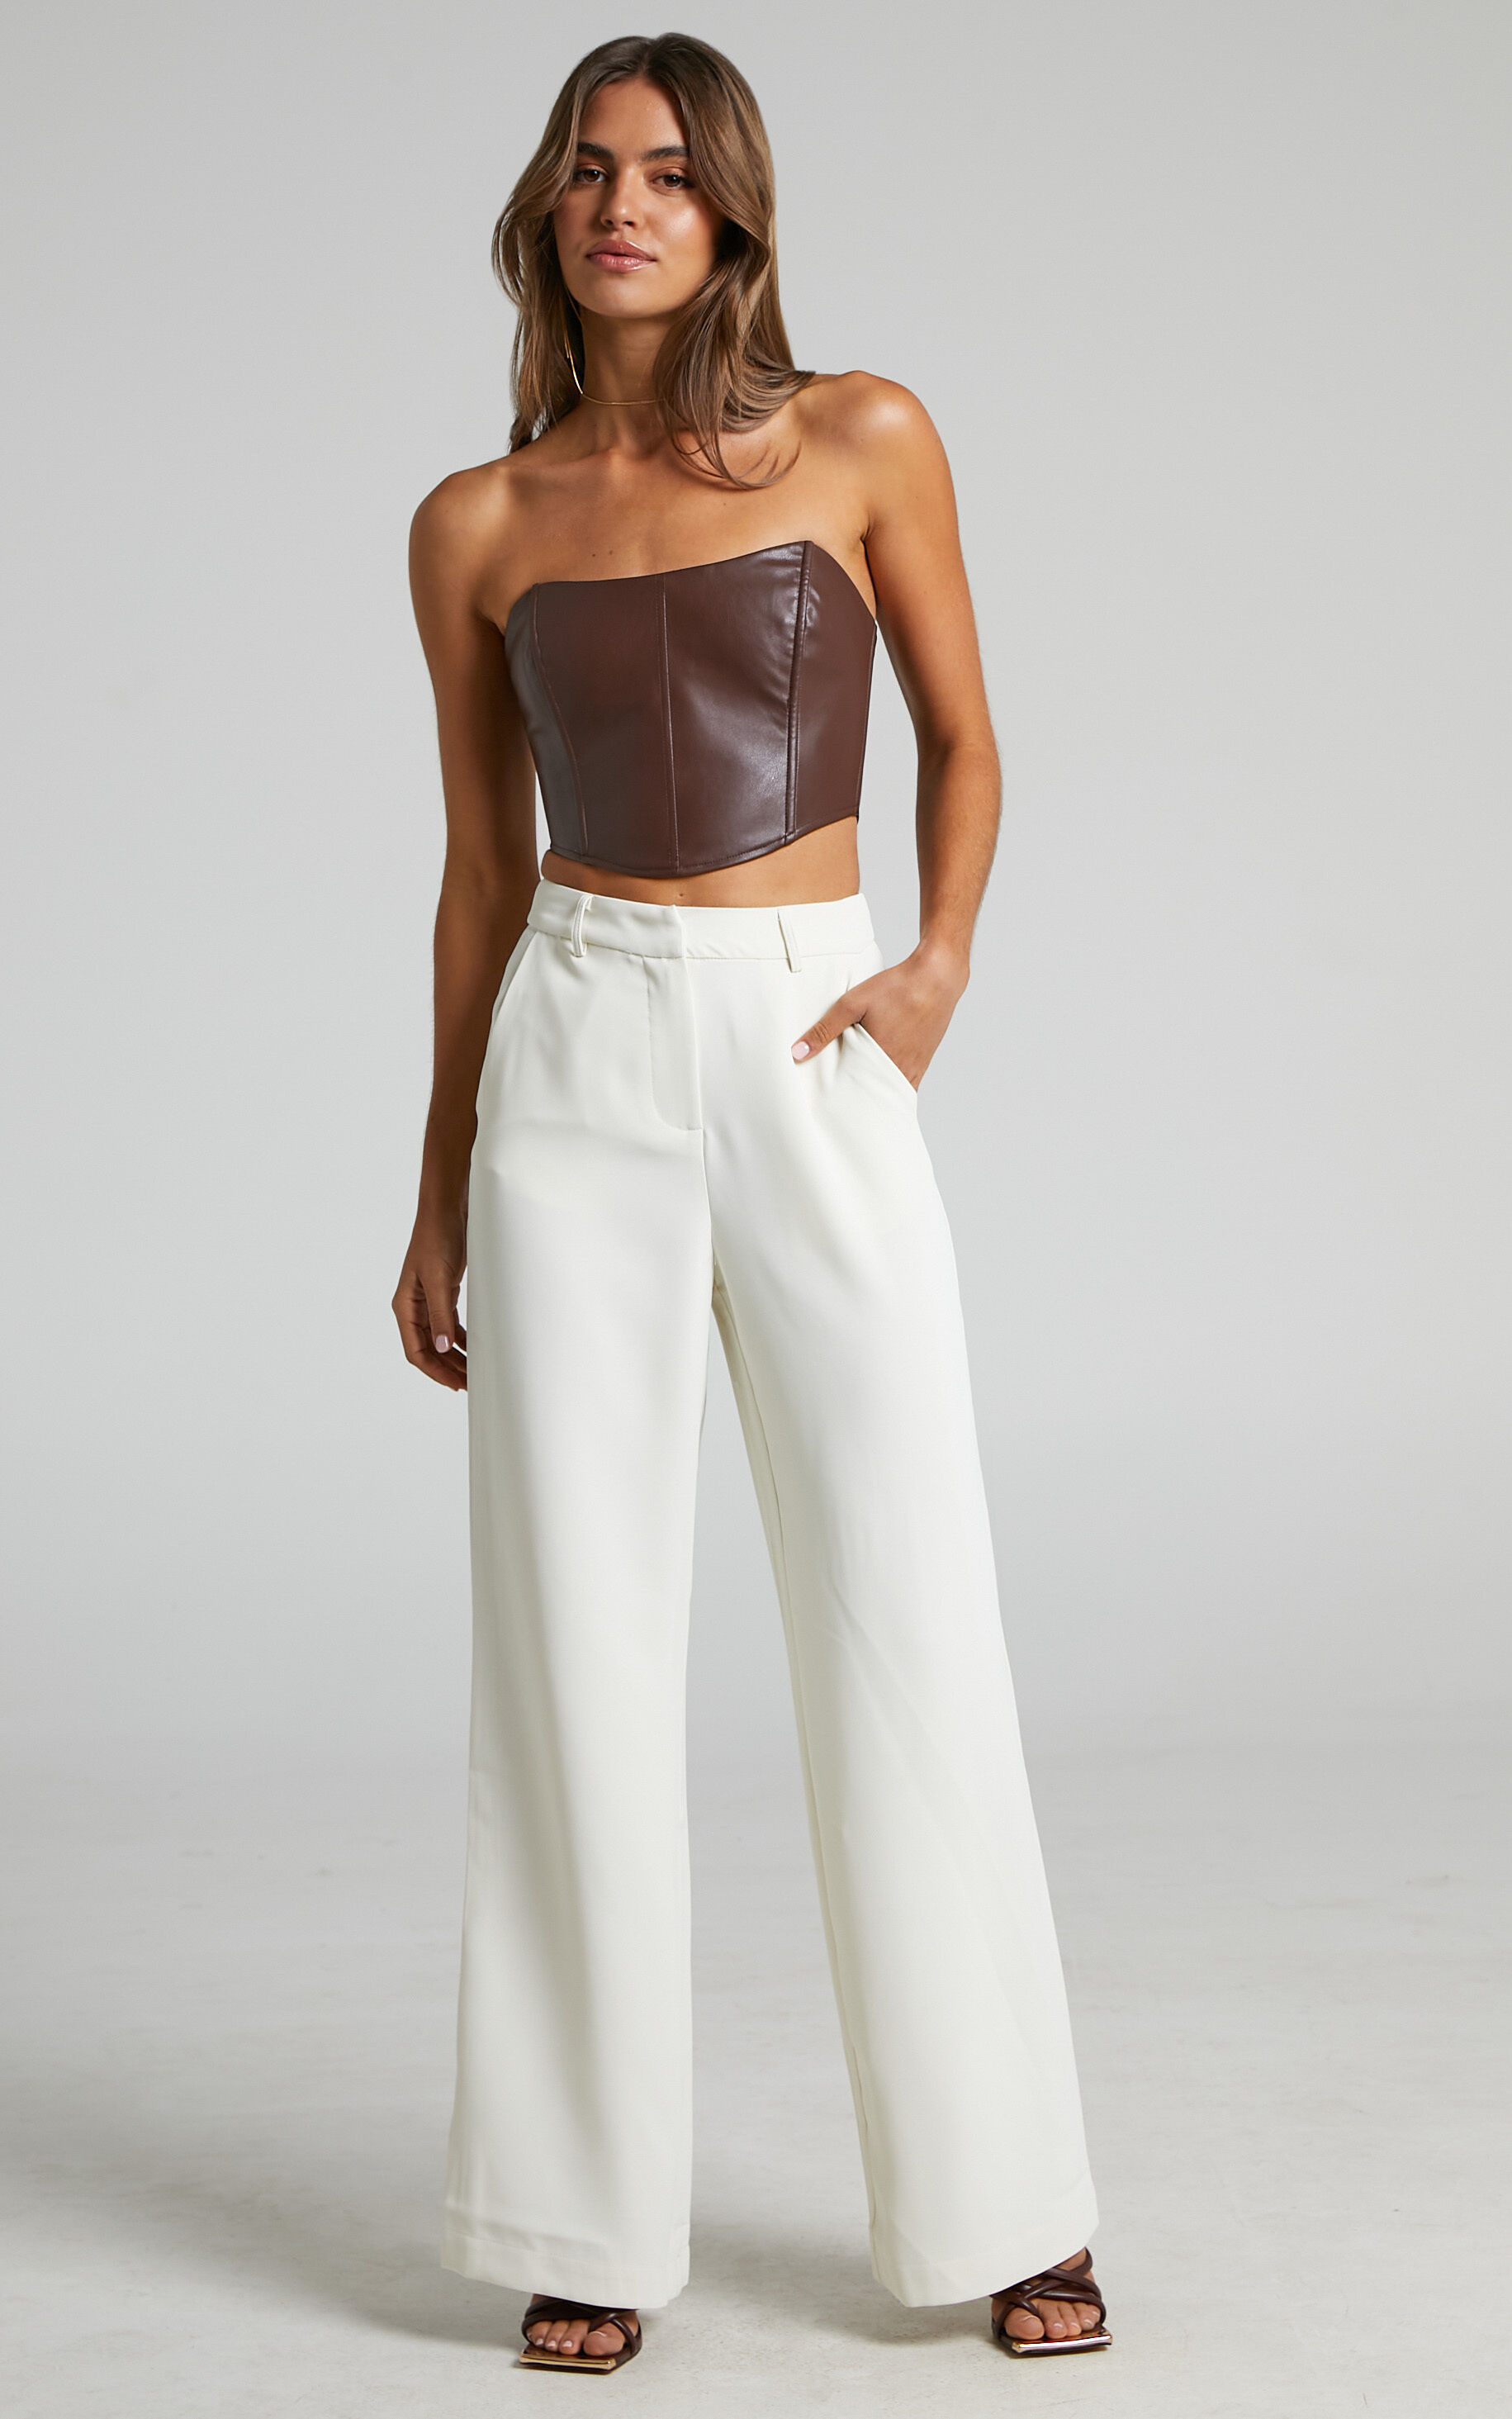 Bonnie Tailored Wide Leg Pants in Stone - 06, NEU1, super-hi-res image number null